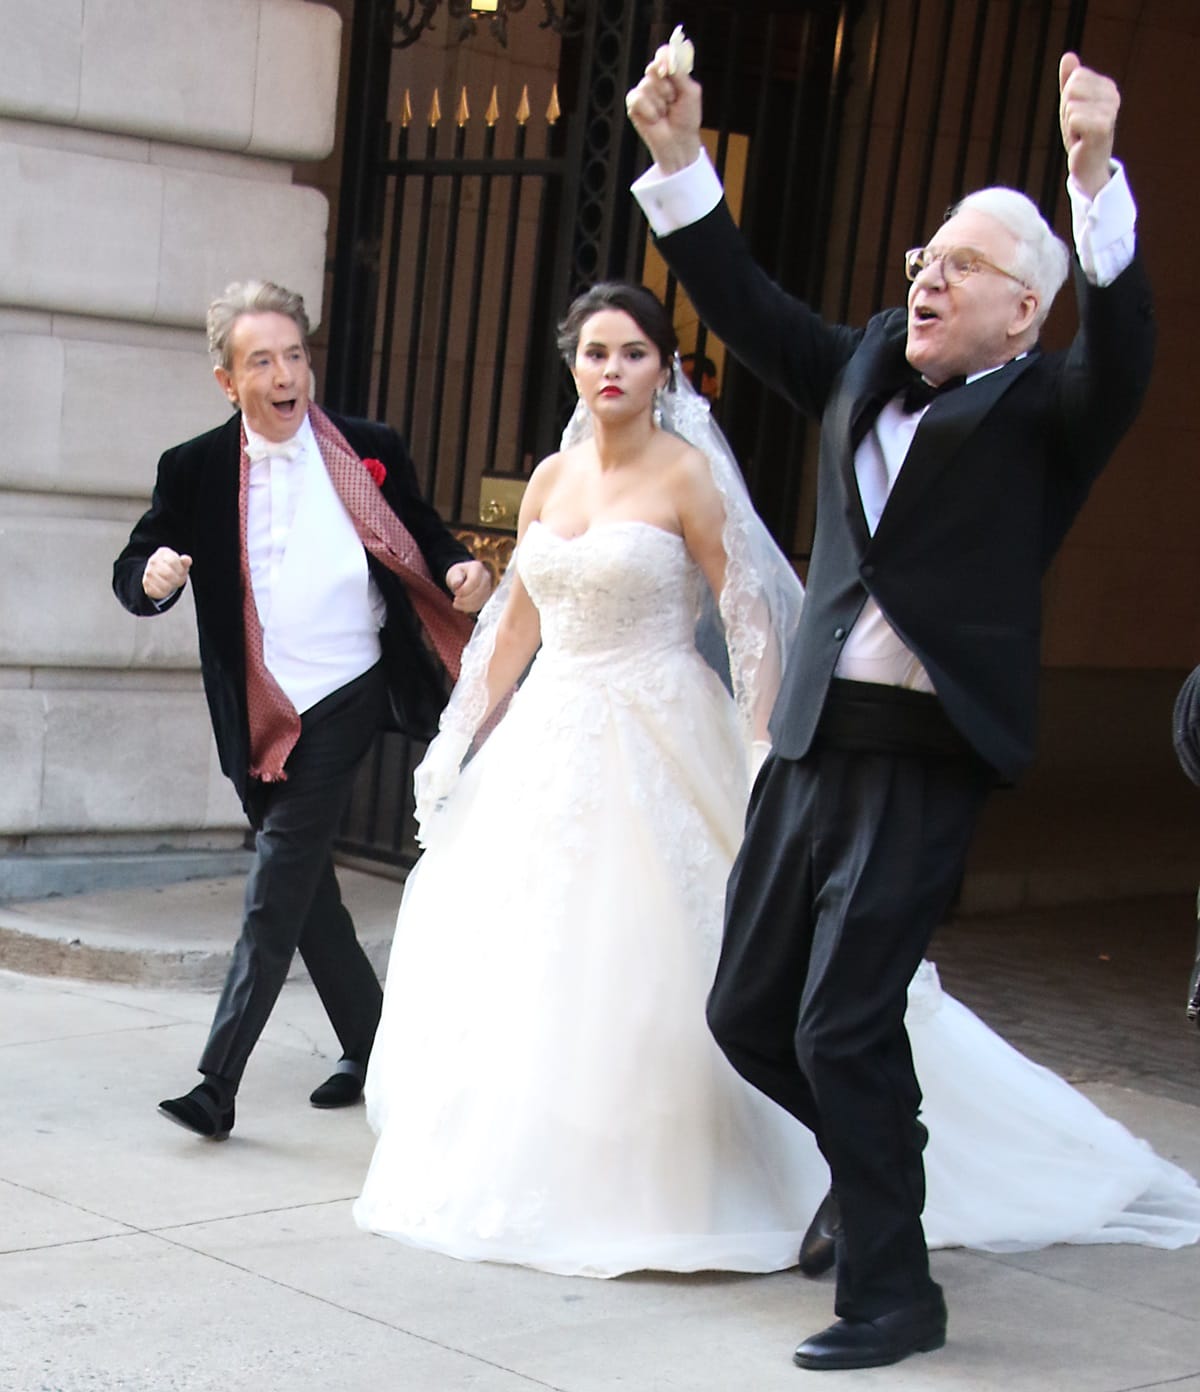 Actress Selena Gomez in a wedding dress filming scenes for season 3 of "Only Murders in the Building" with co-stars Steve Martin and Martin Short